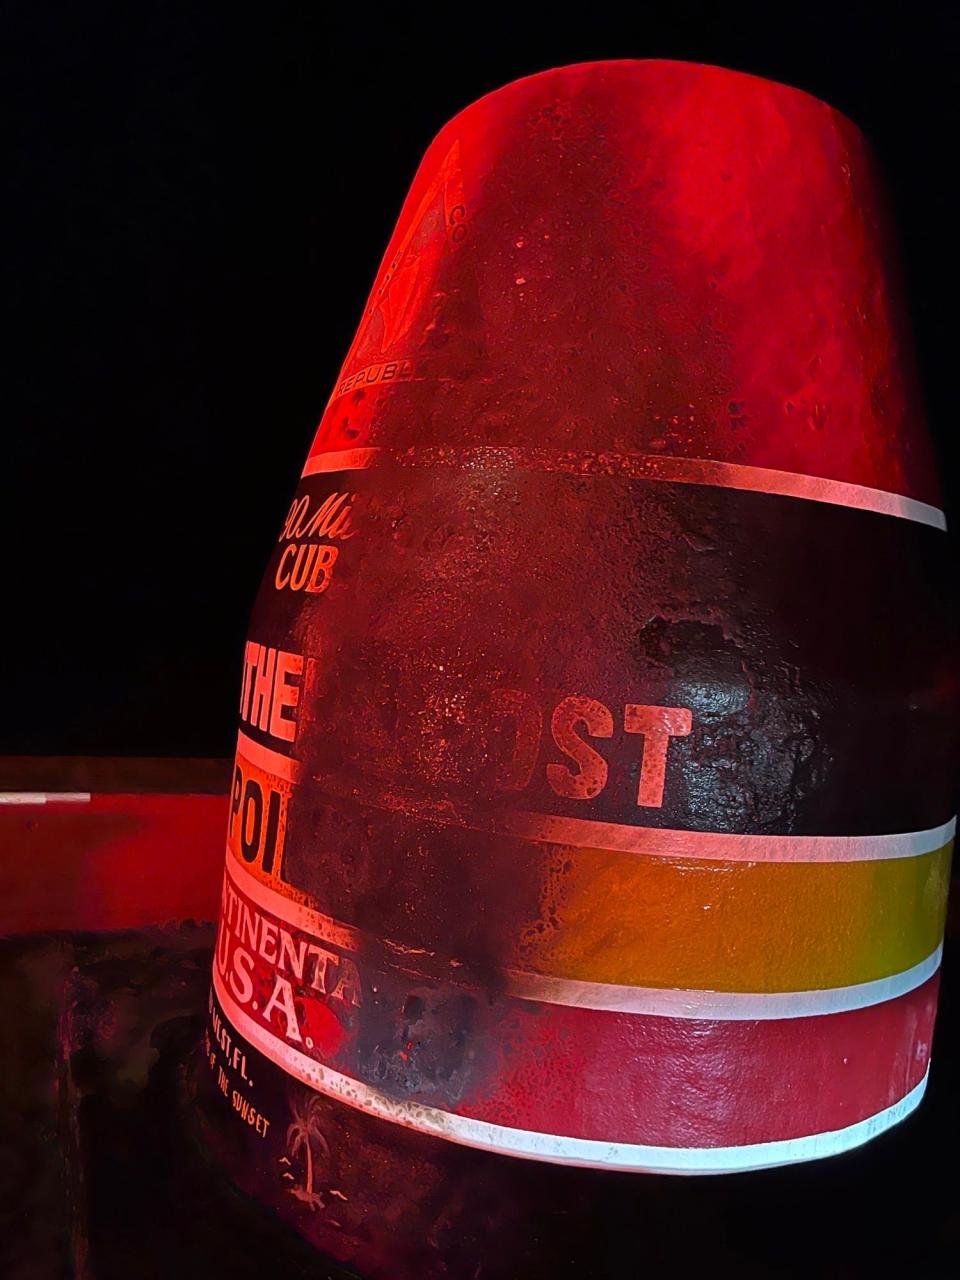 Key West's Southernmost Point Buoy was burned on New Year's Day. Two suspects - one from Leesburg - are set to turn themselves in, according to the Key West Police Department.